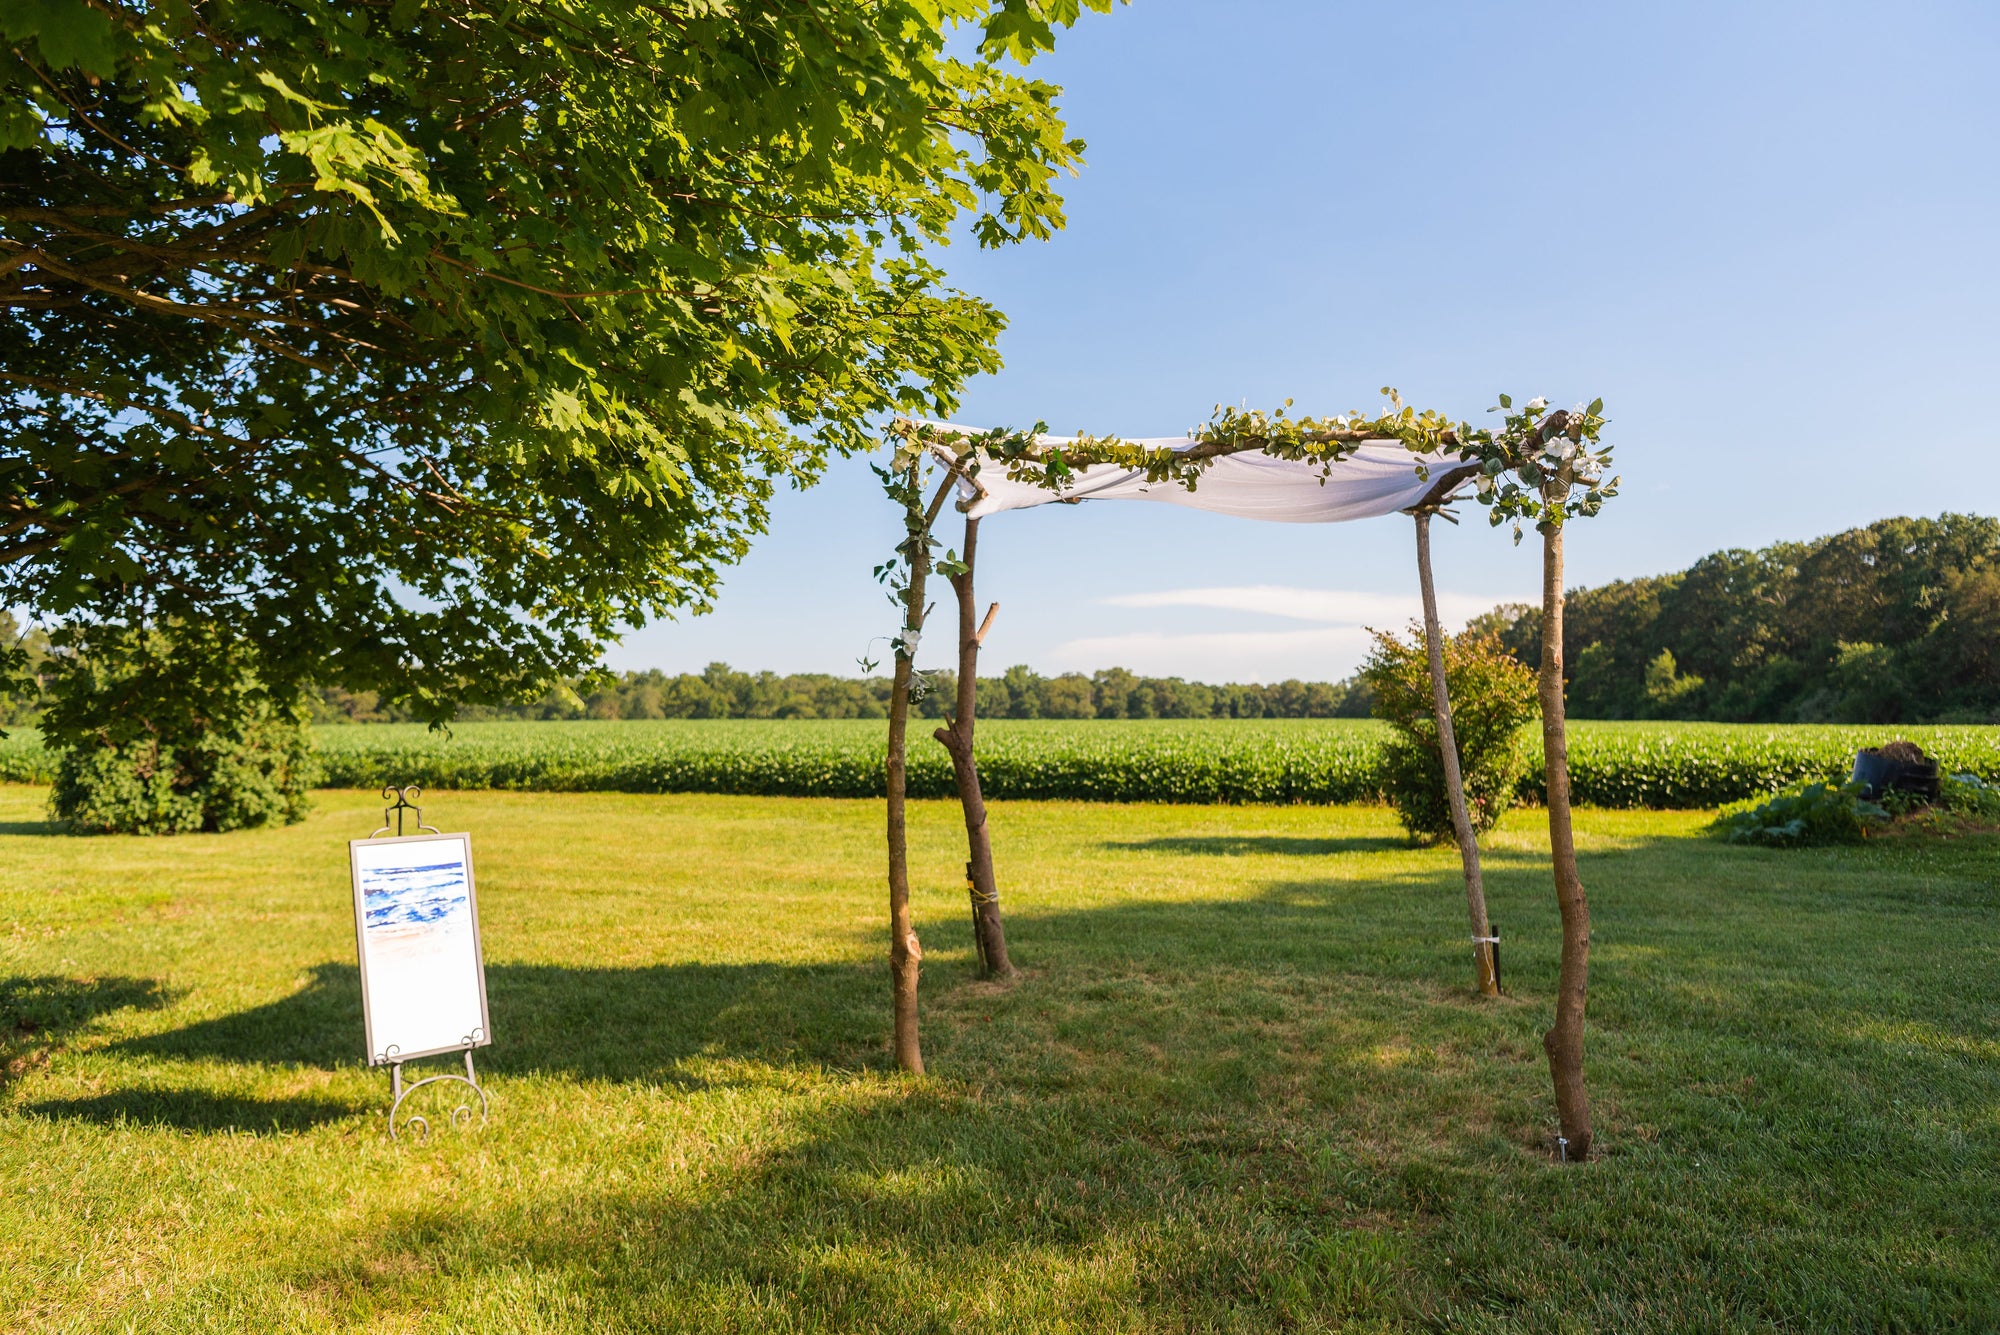 5 things You Need To Know about your Chuppah ceremony